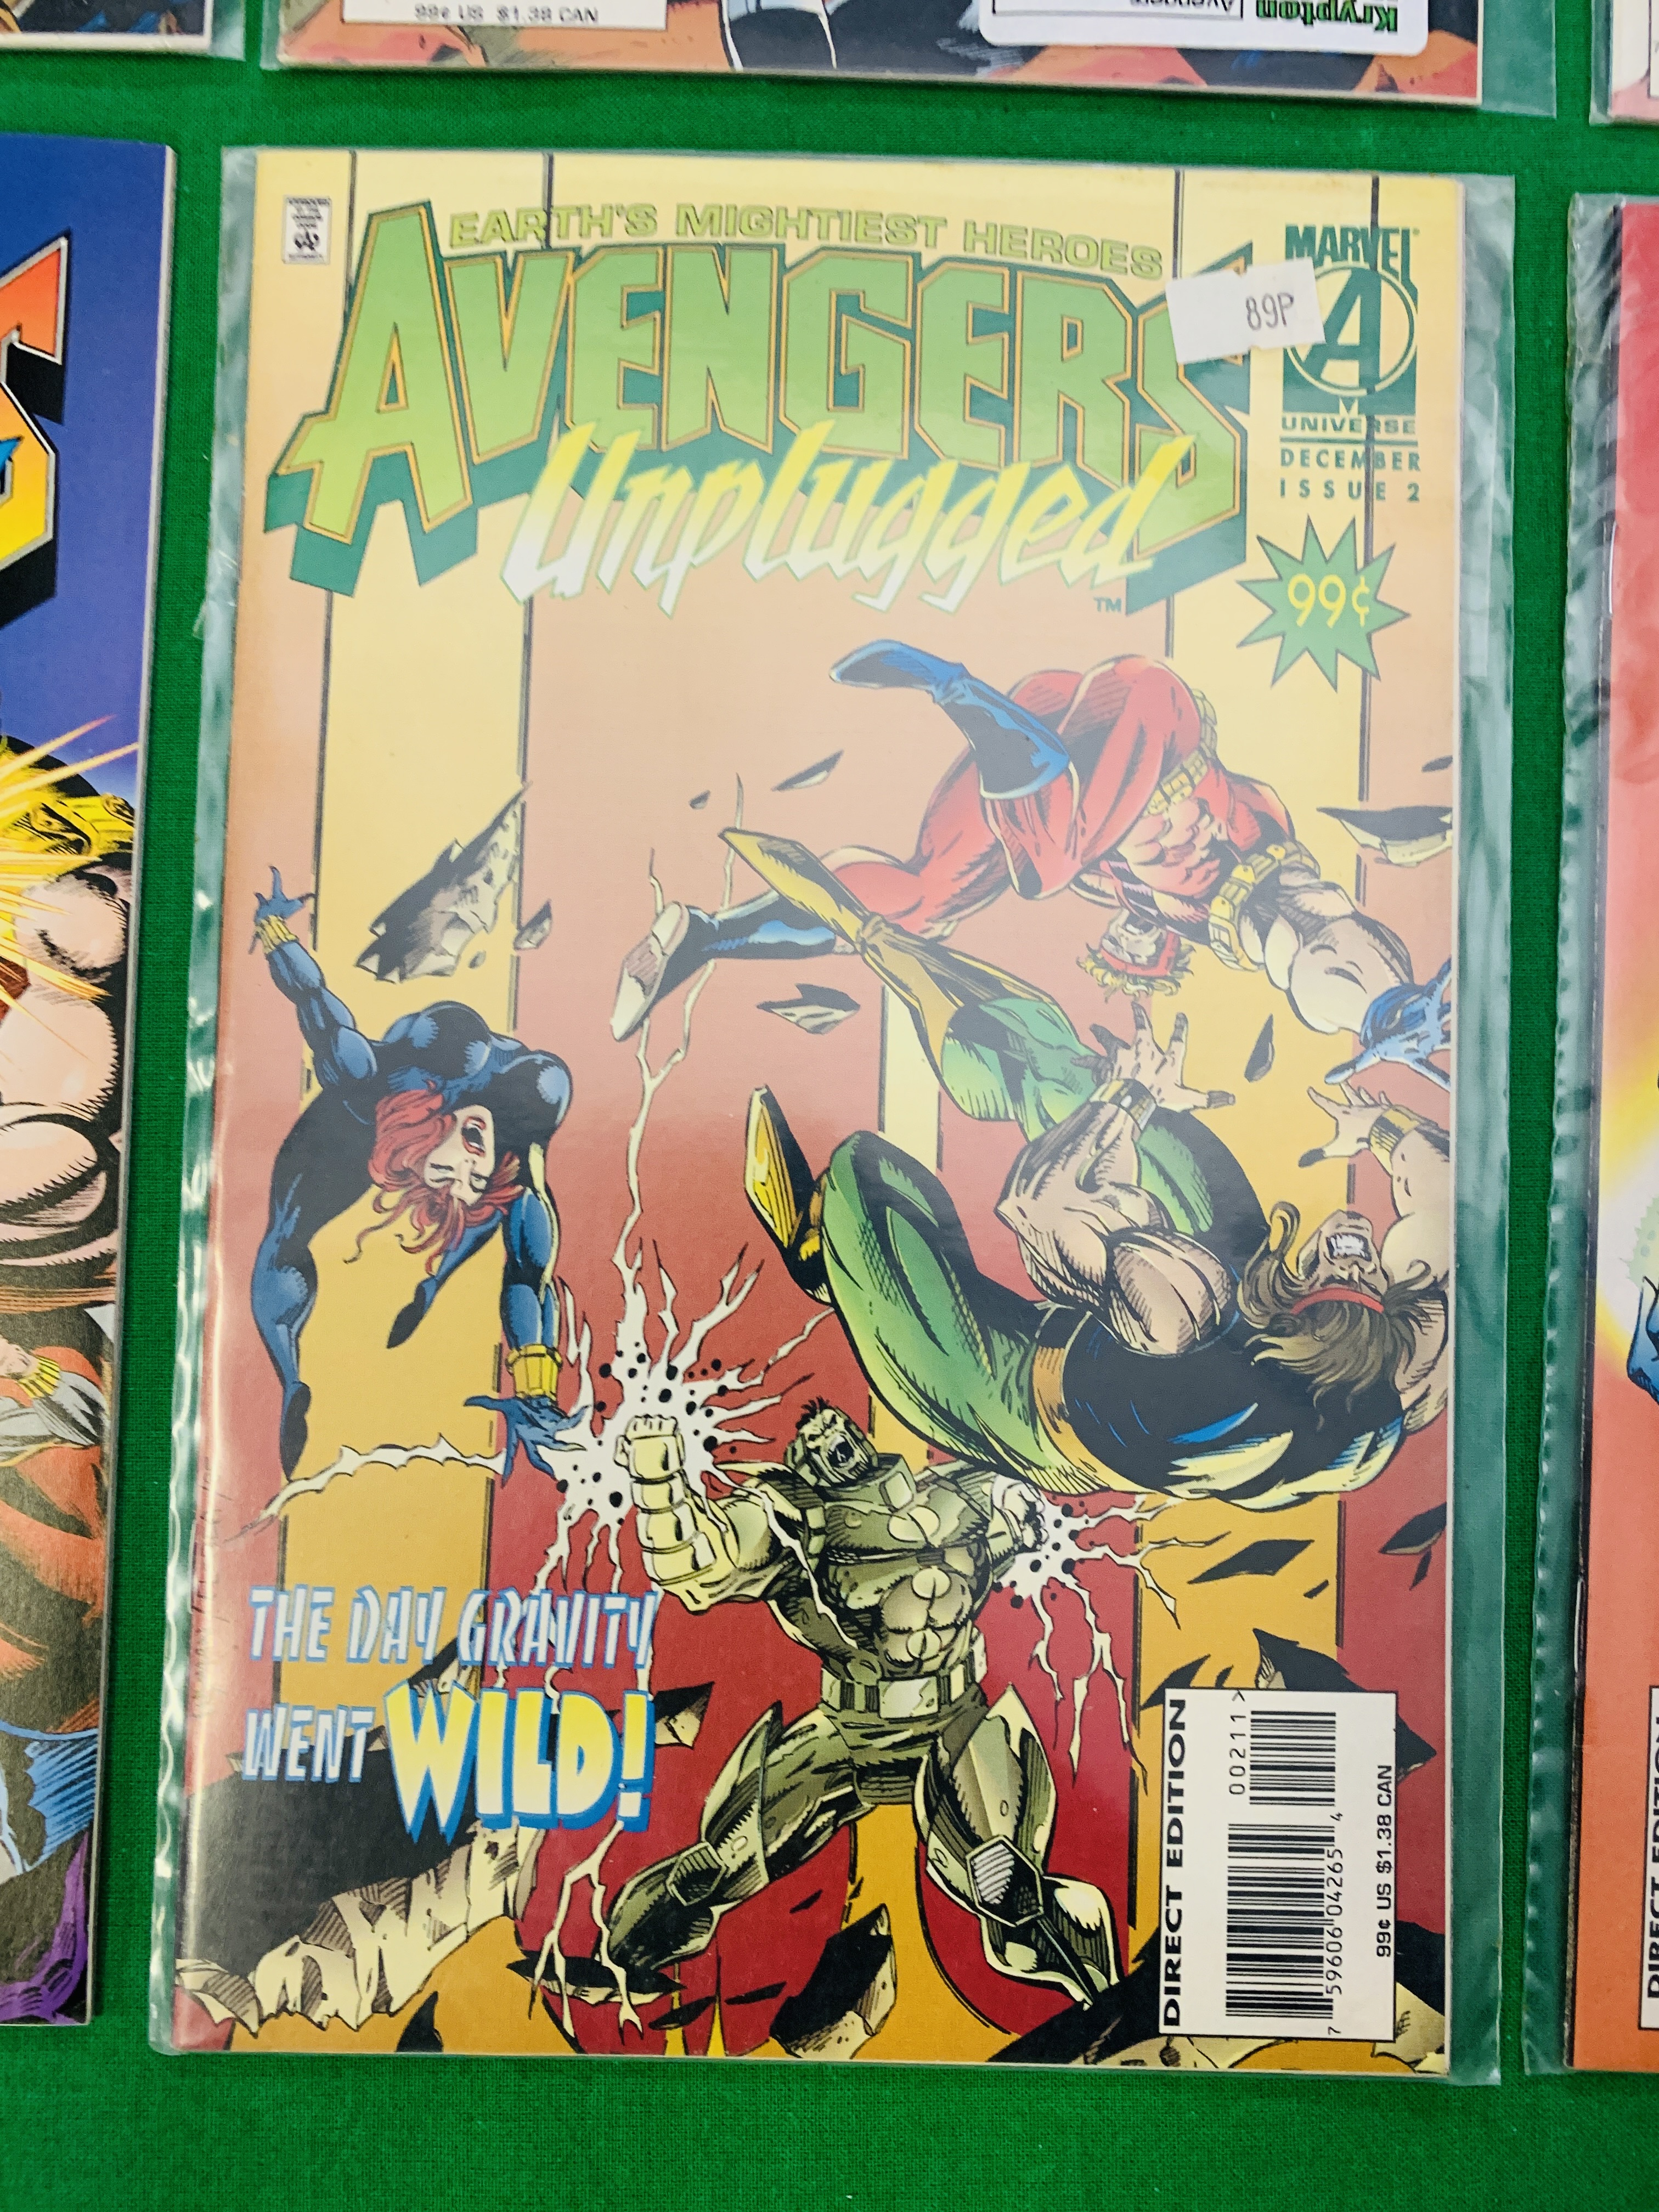 MARVEL COMICS THE AVENGERS UNPLUGGED NO. 1 - 6 FROM 1996, FIRST APPEARANCE NO. 5. MONICA RAMBEAU. - Image 3 of 7